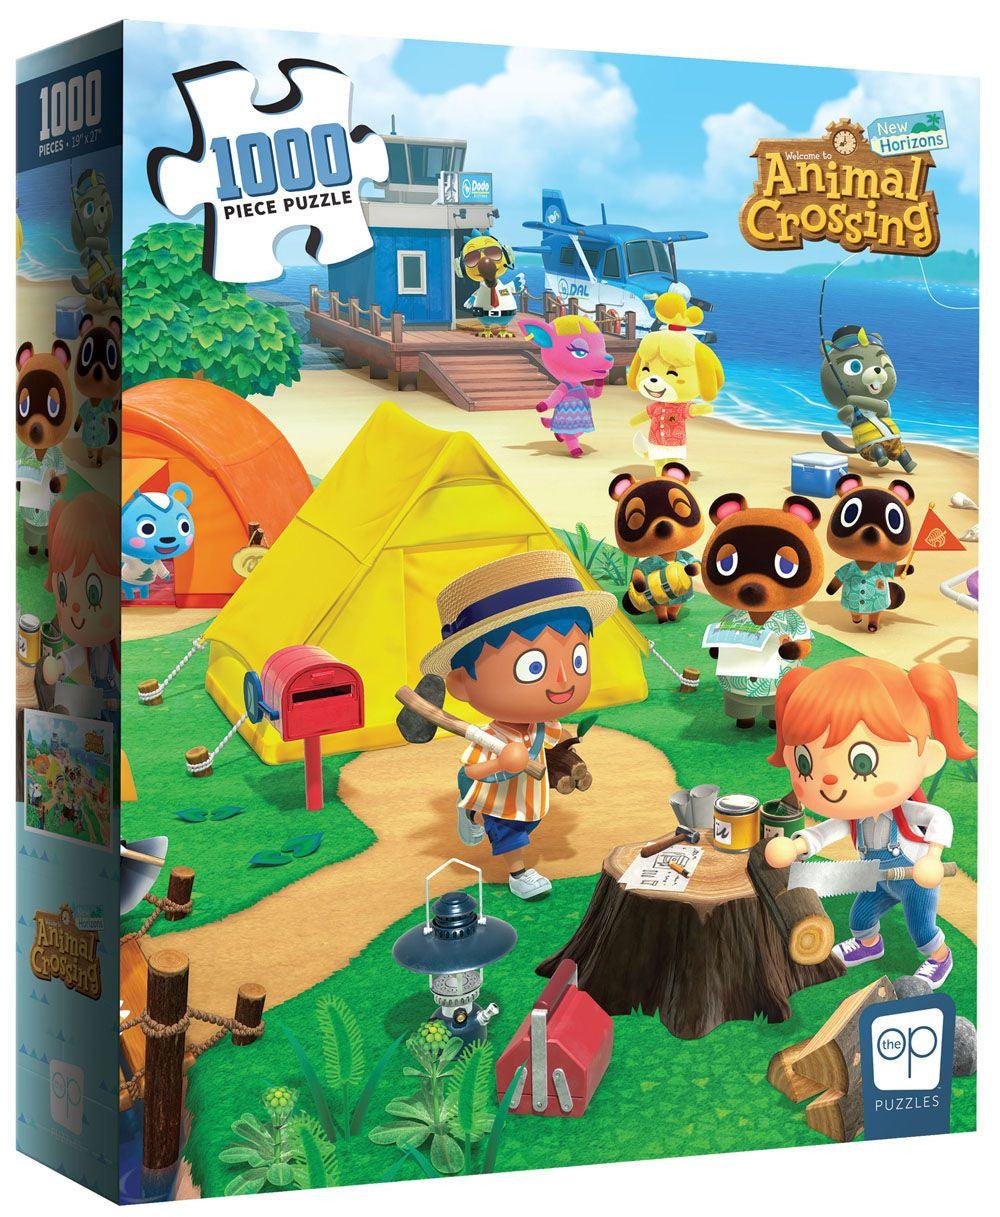 VR-91438 The Op Animal Crossing New Horizons Welcome to Animal Crossing Puzzle 1,000 pieces - The Op - Titan Pop Culture